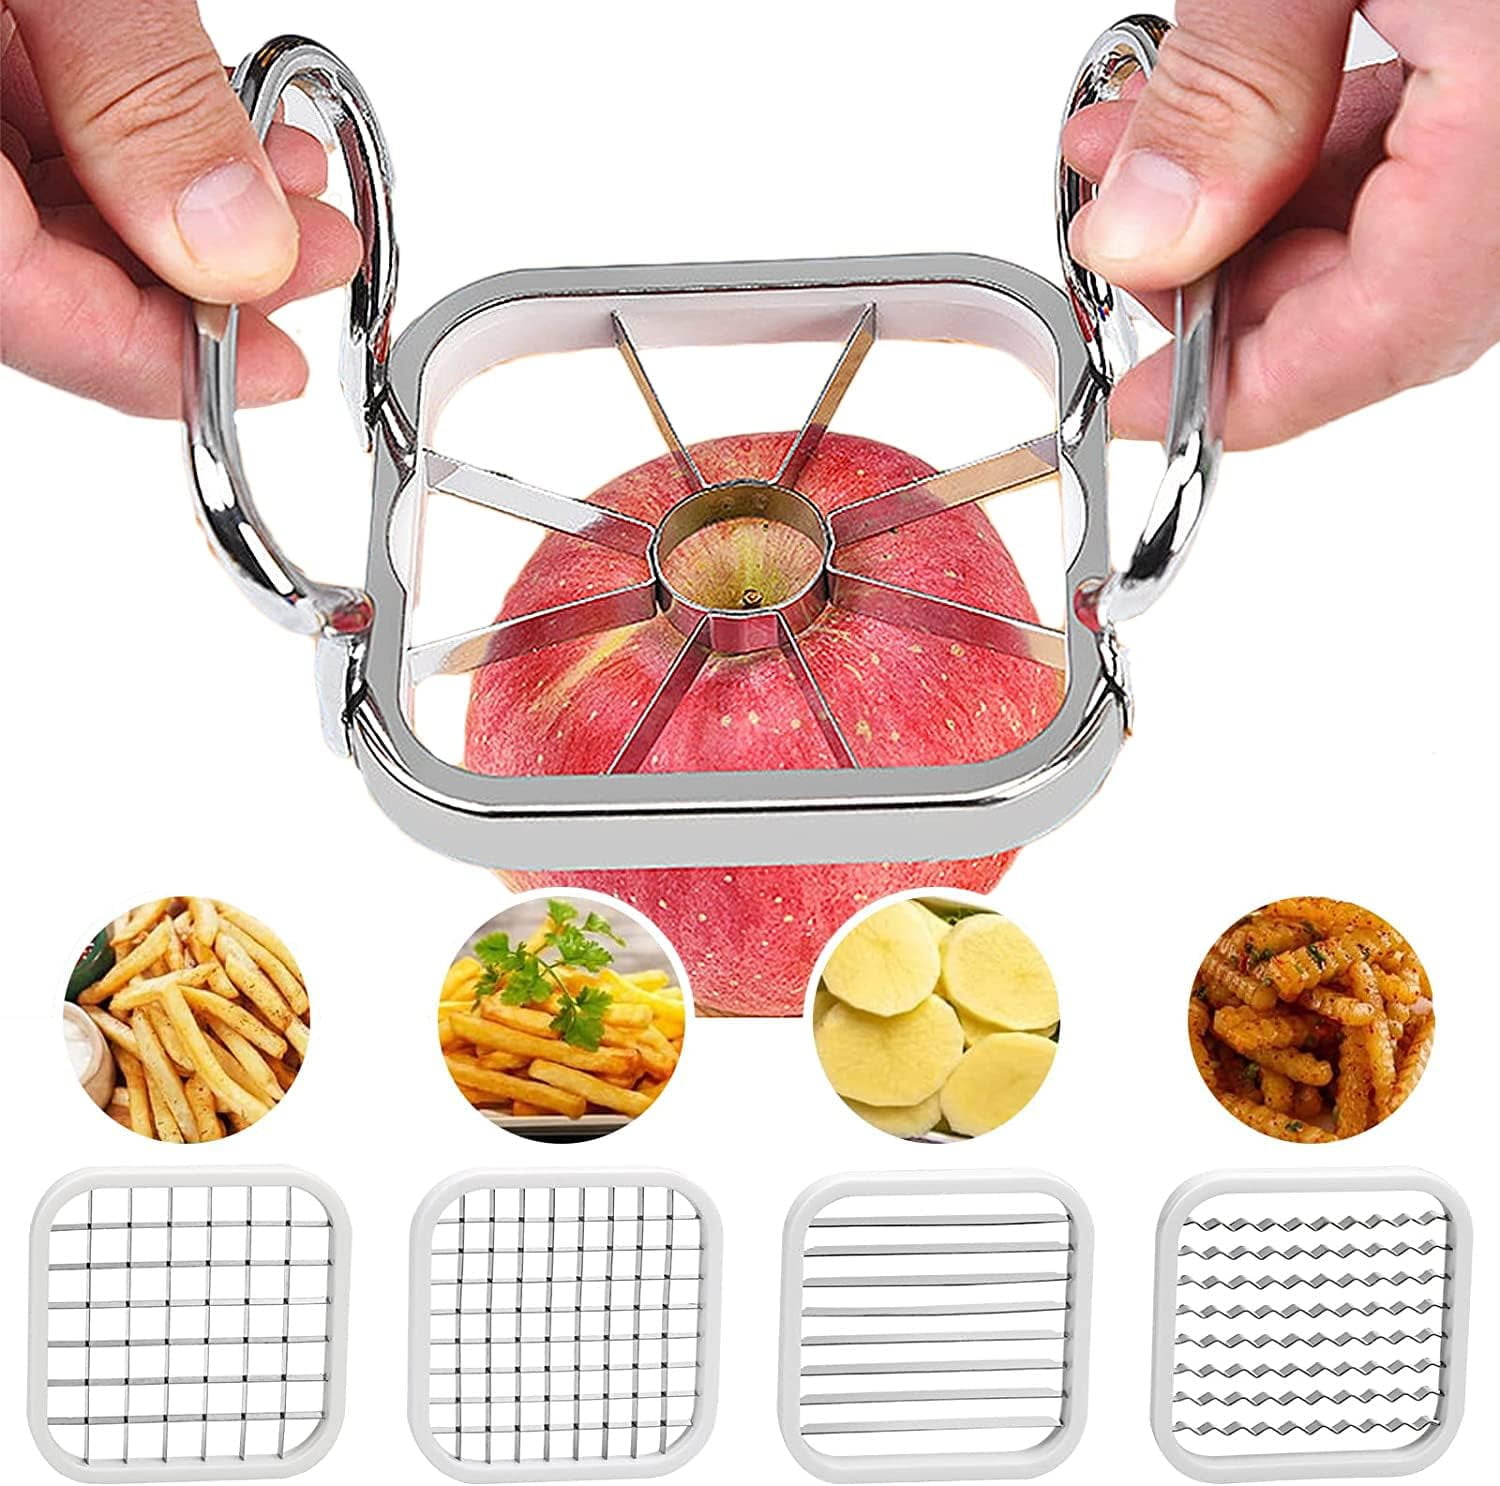 Potato Slicer Multifunction Vegetable Fruit Chopper with 2 Stainless Steel  Blades for Tomato Potato Cooking Slicer Gadget